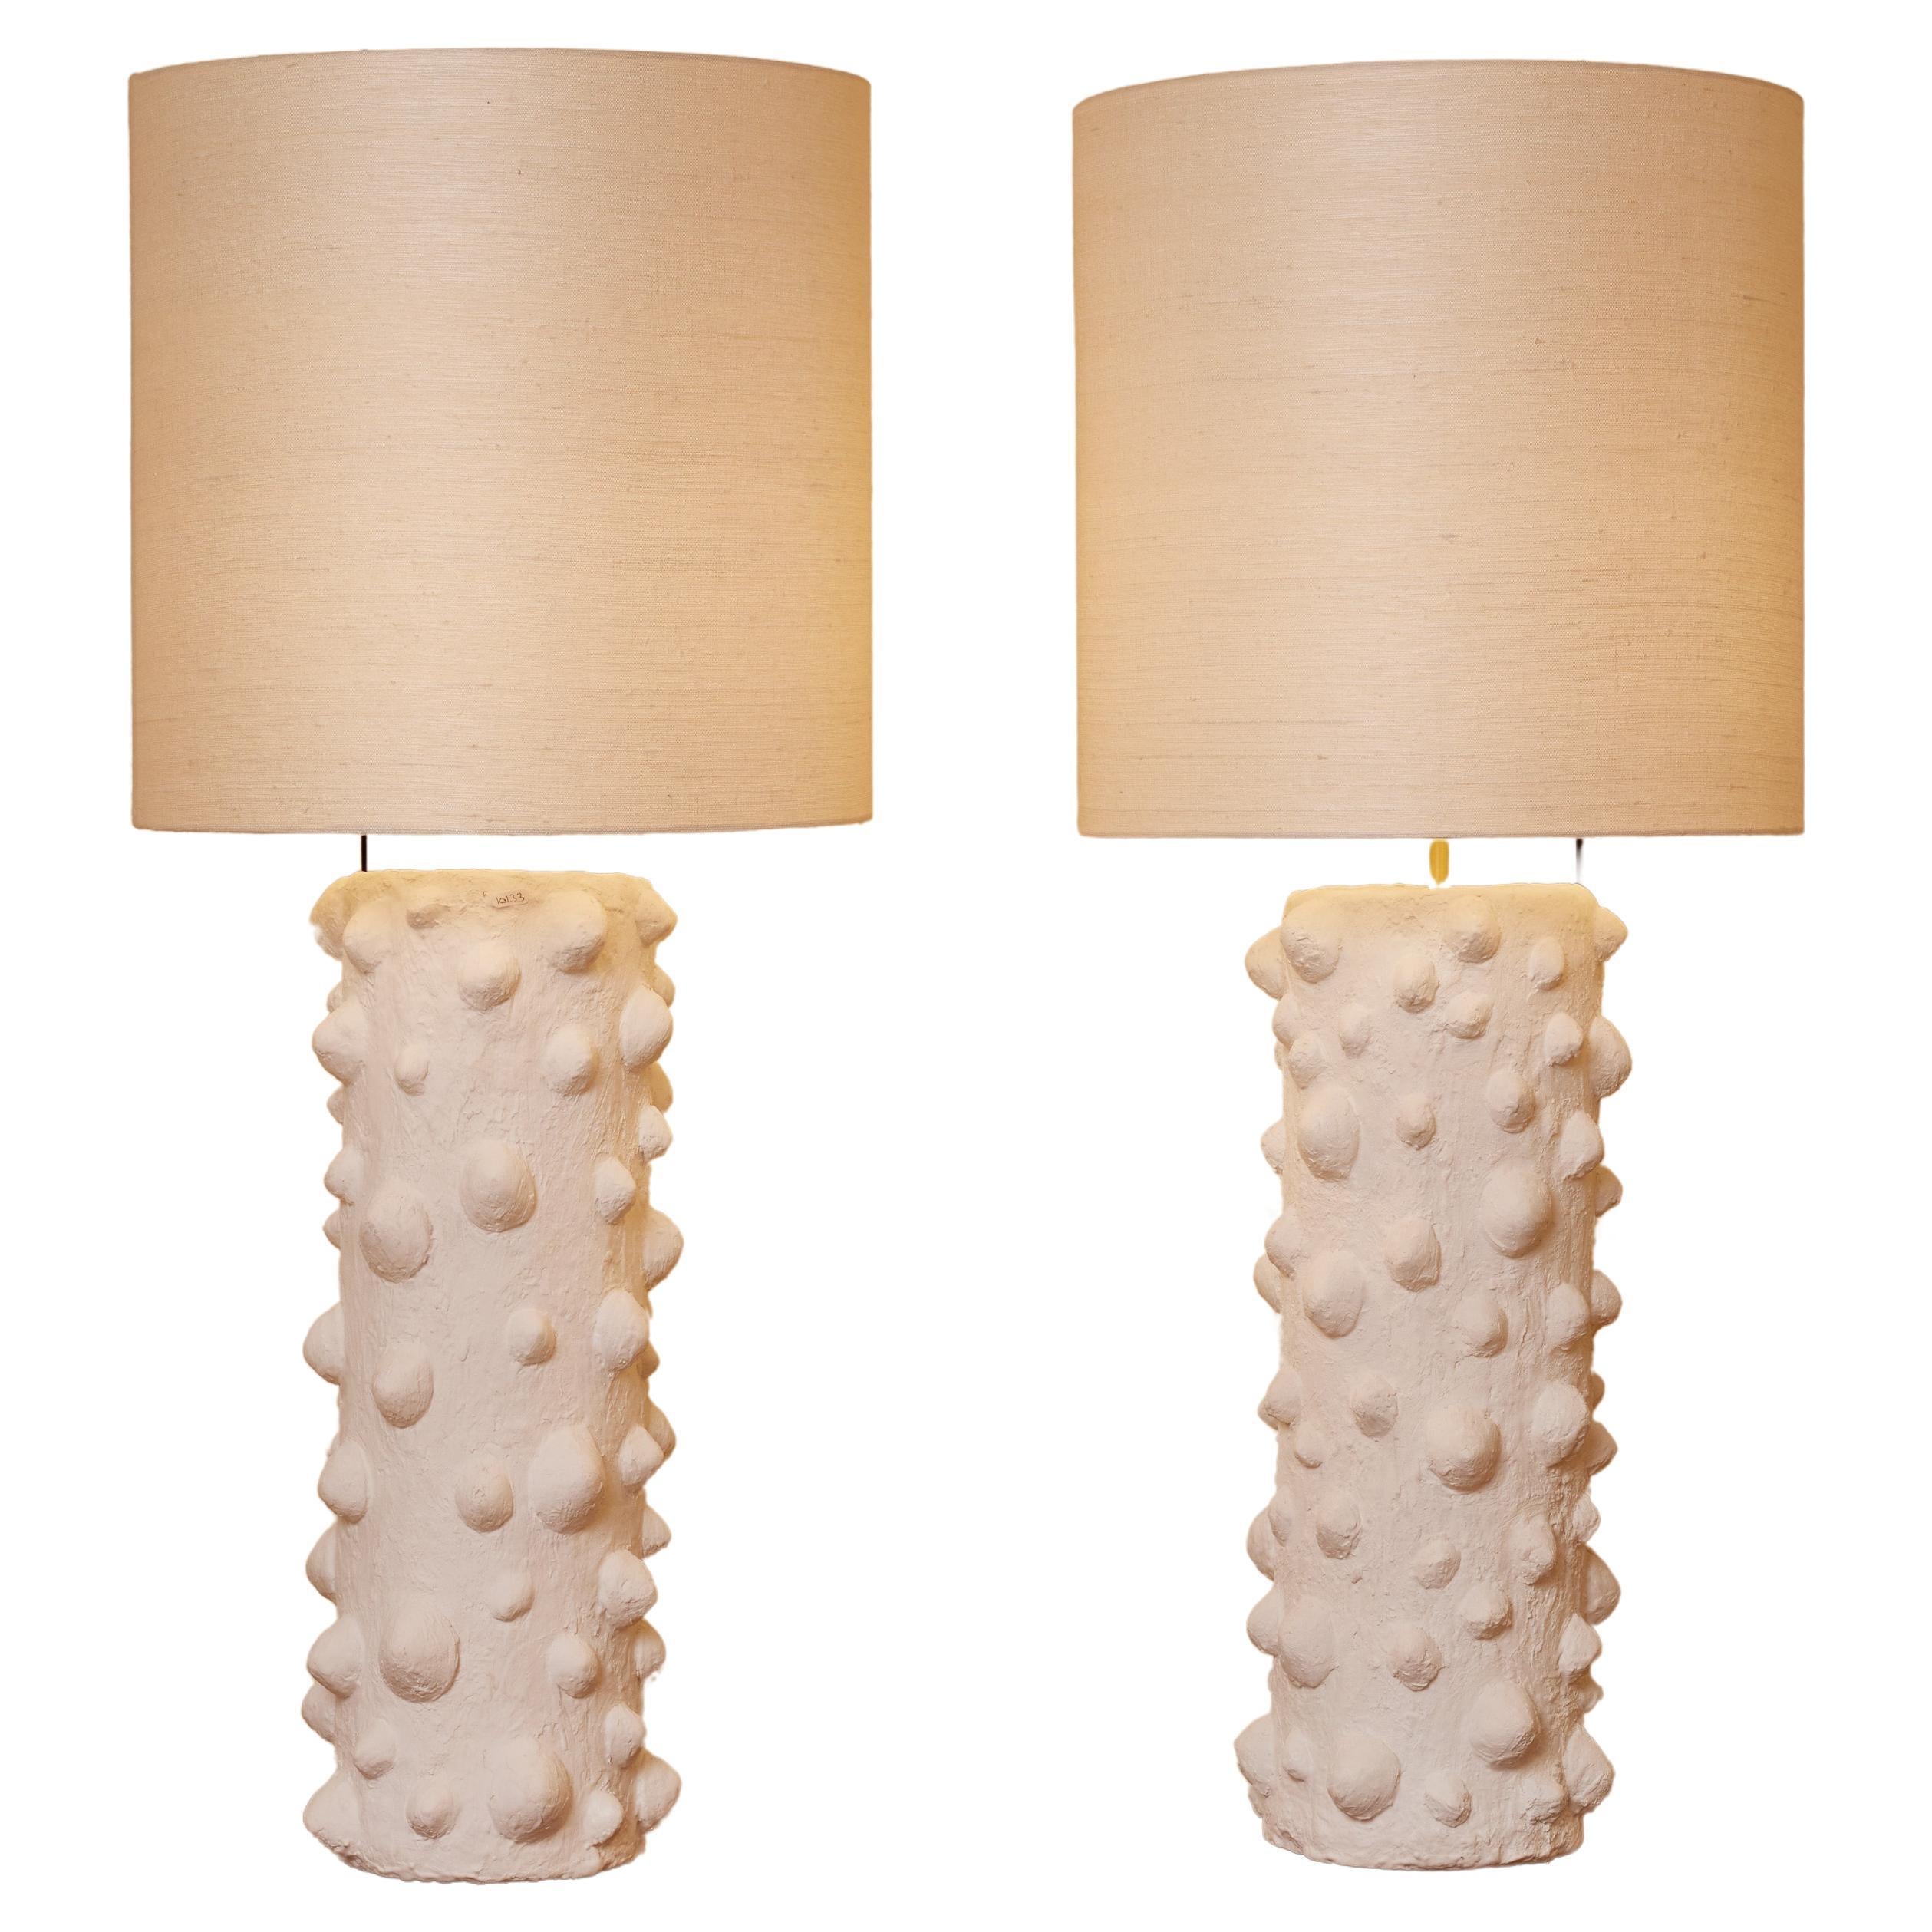 Plaster table lamps by LYNX For Sale